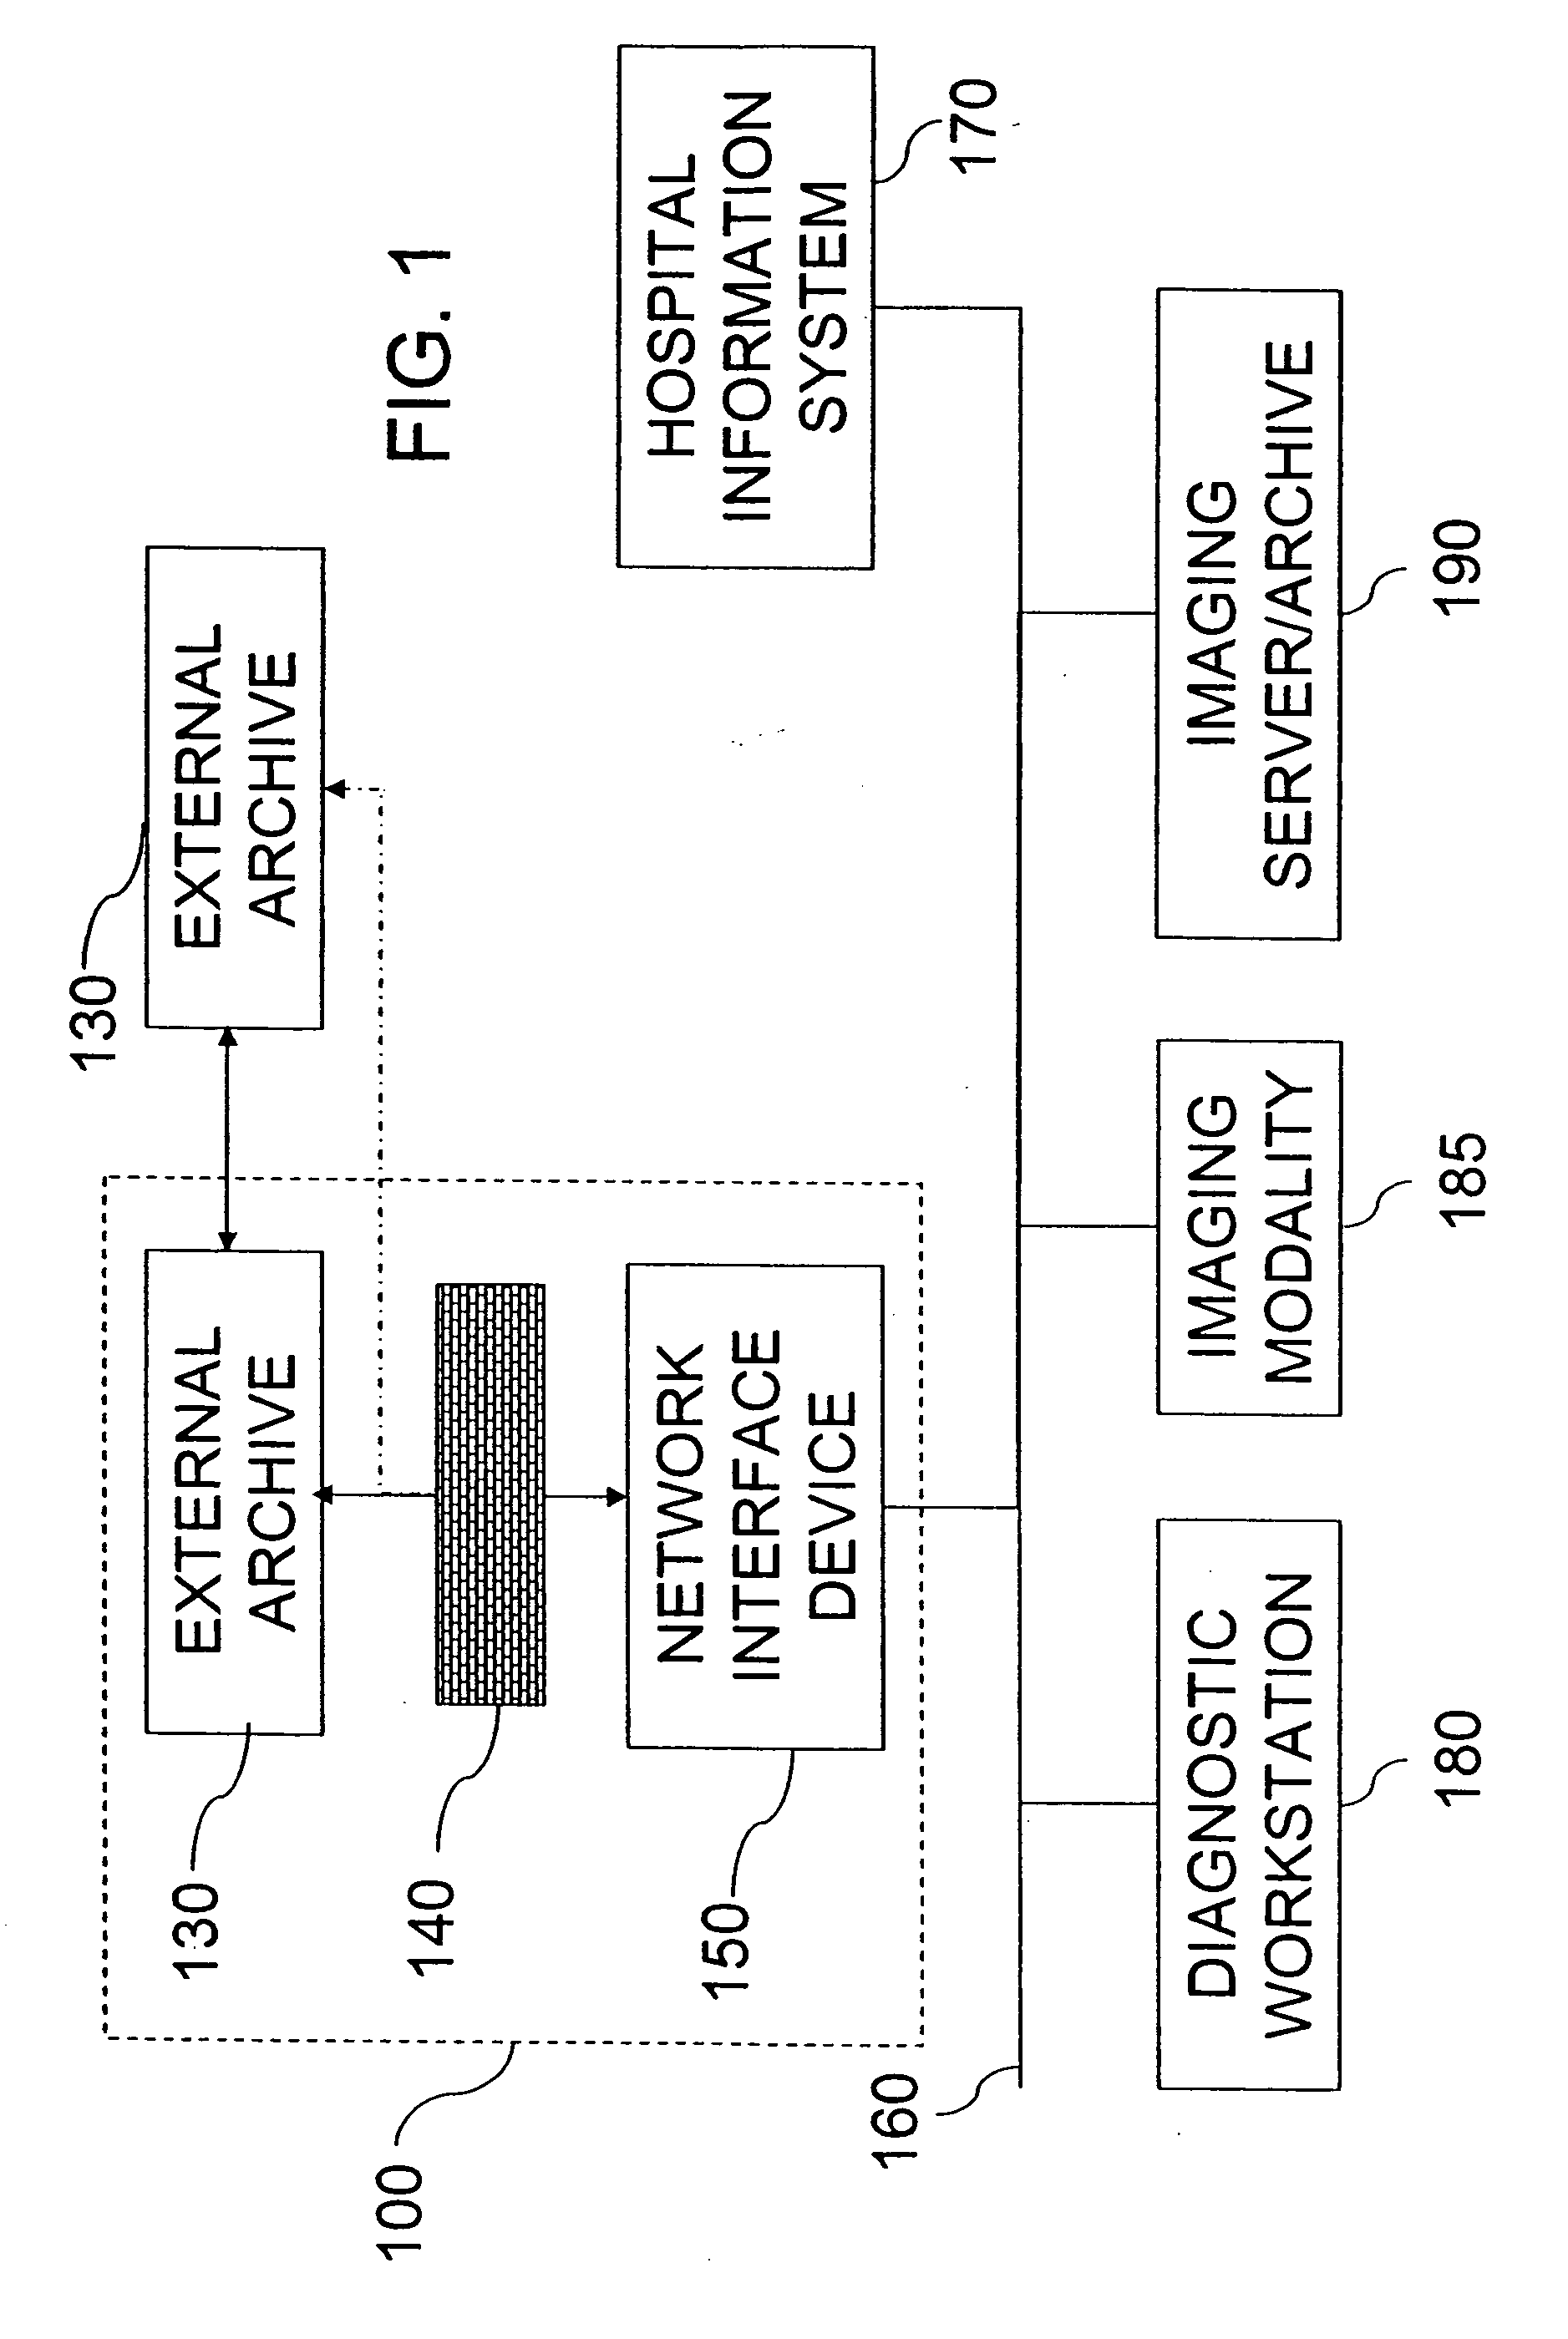 System and method for backing up medical records